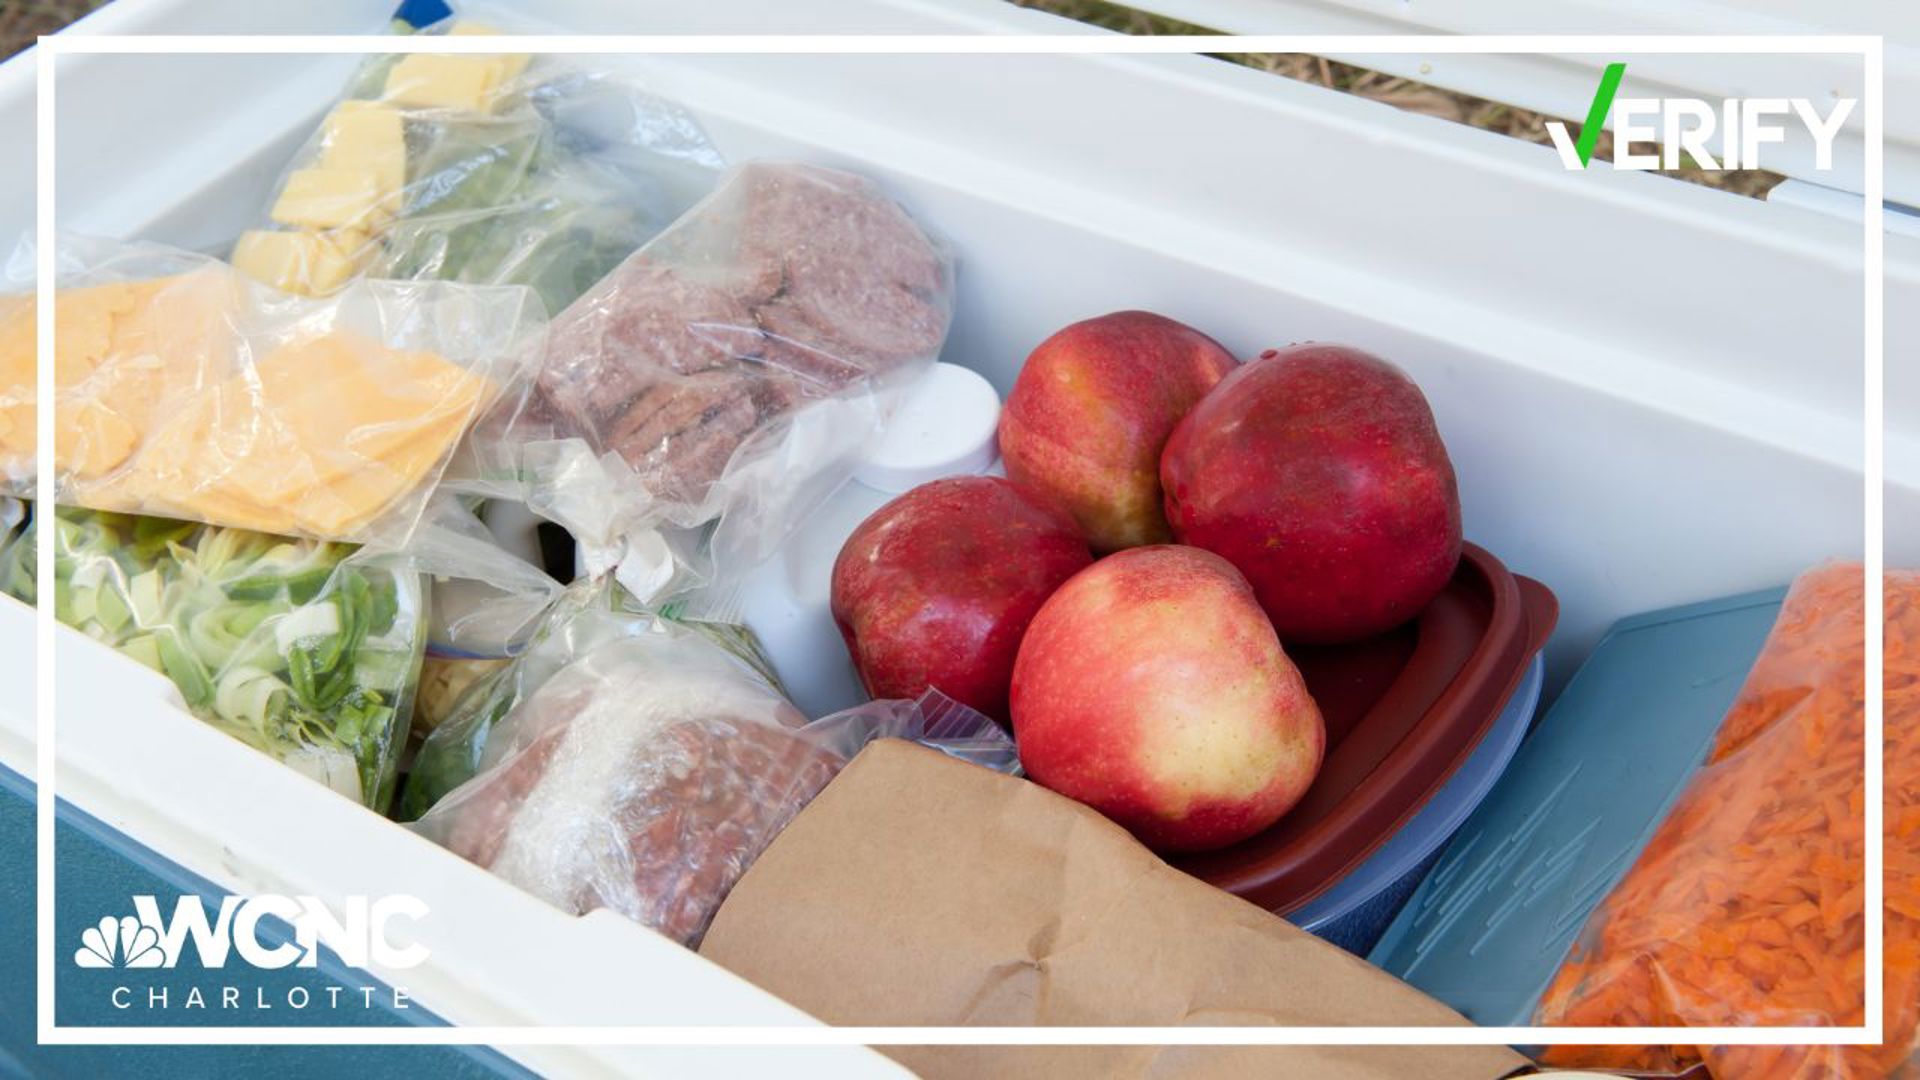 Before you pack up the cooler for a summer outing, here are some tips on keeping your food and family safe.